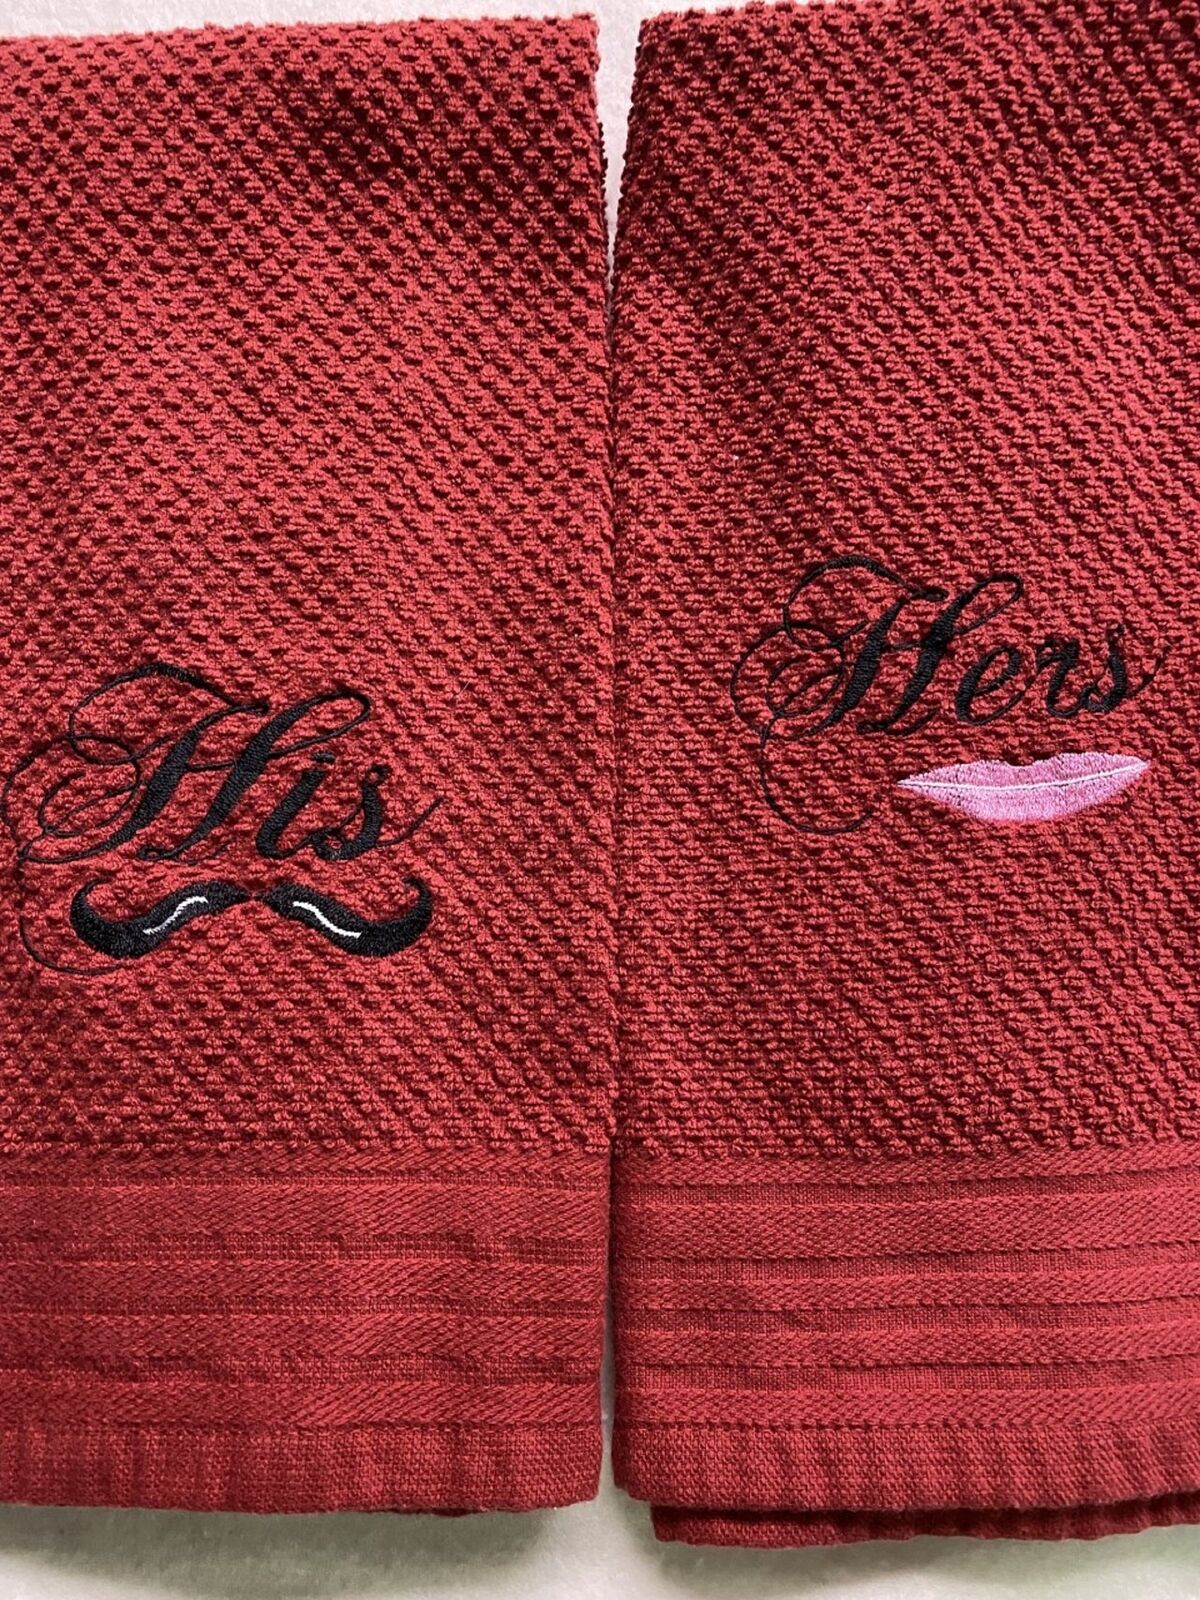 Set of His and Hers Hand Towels-Machine Embroidered-Dark Red Color